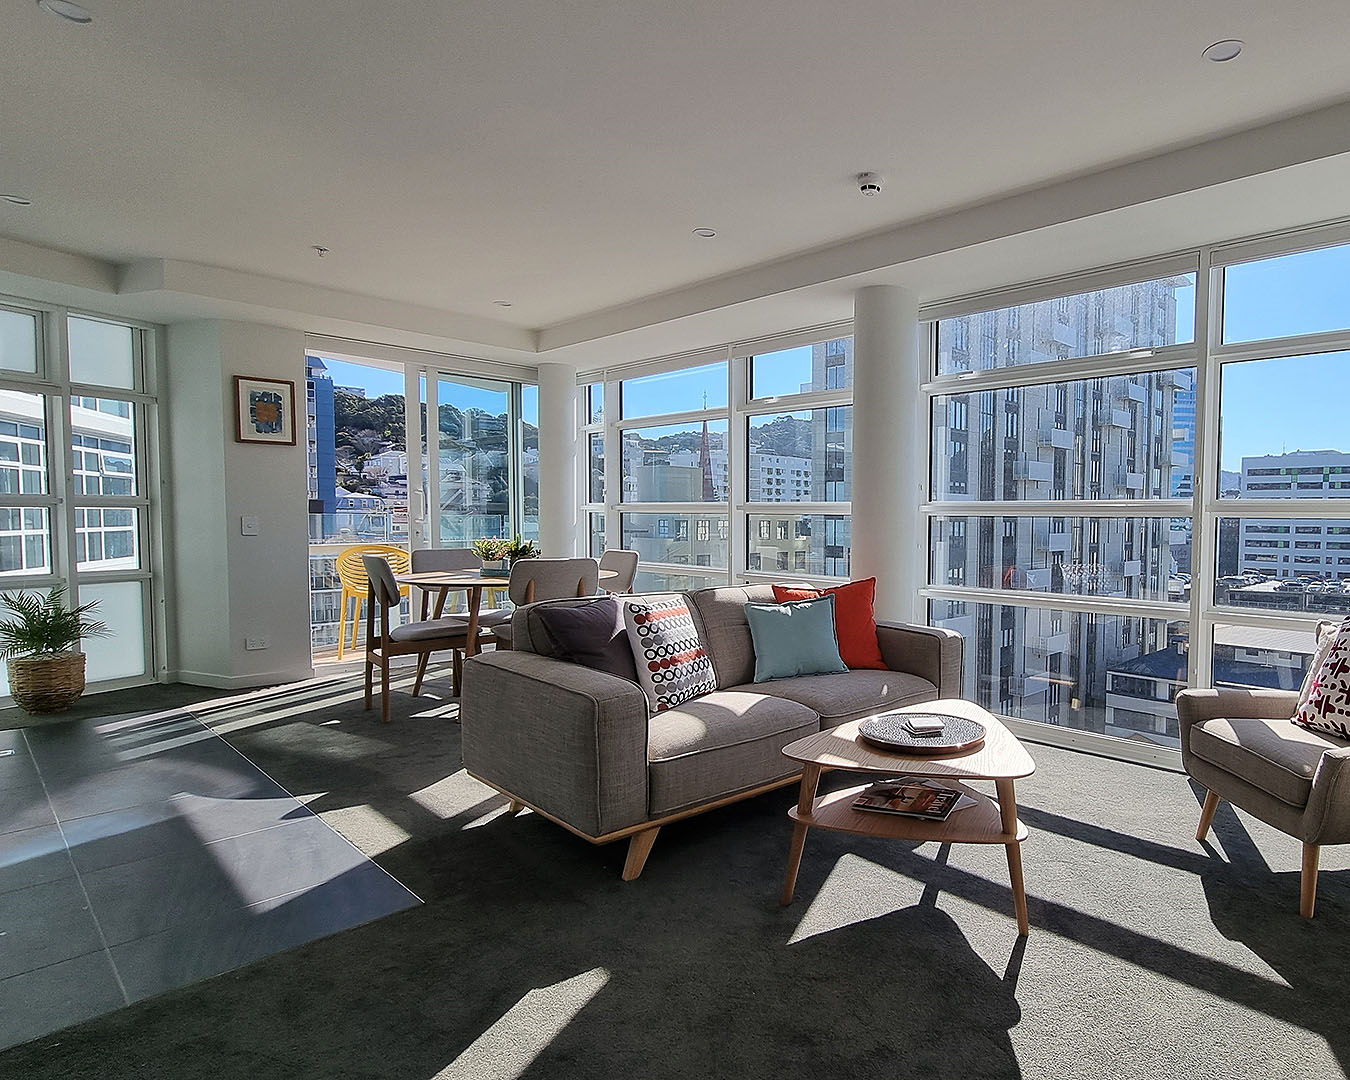 The large lounge of the Pinnacle apartment is lined by a floor-to-ceiling window with sweeping city views.